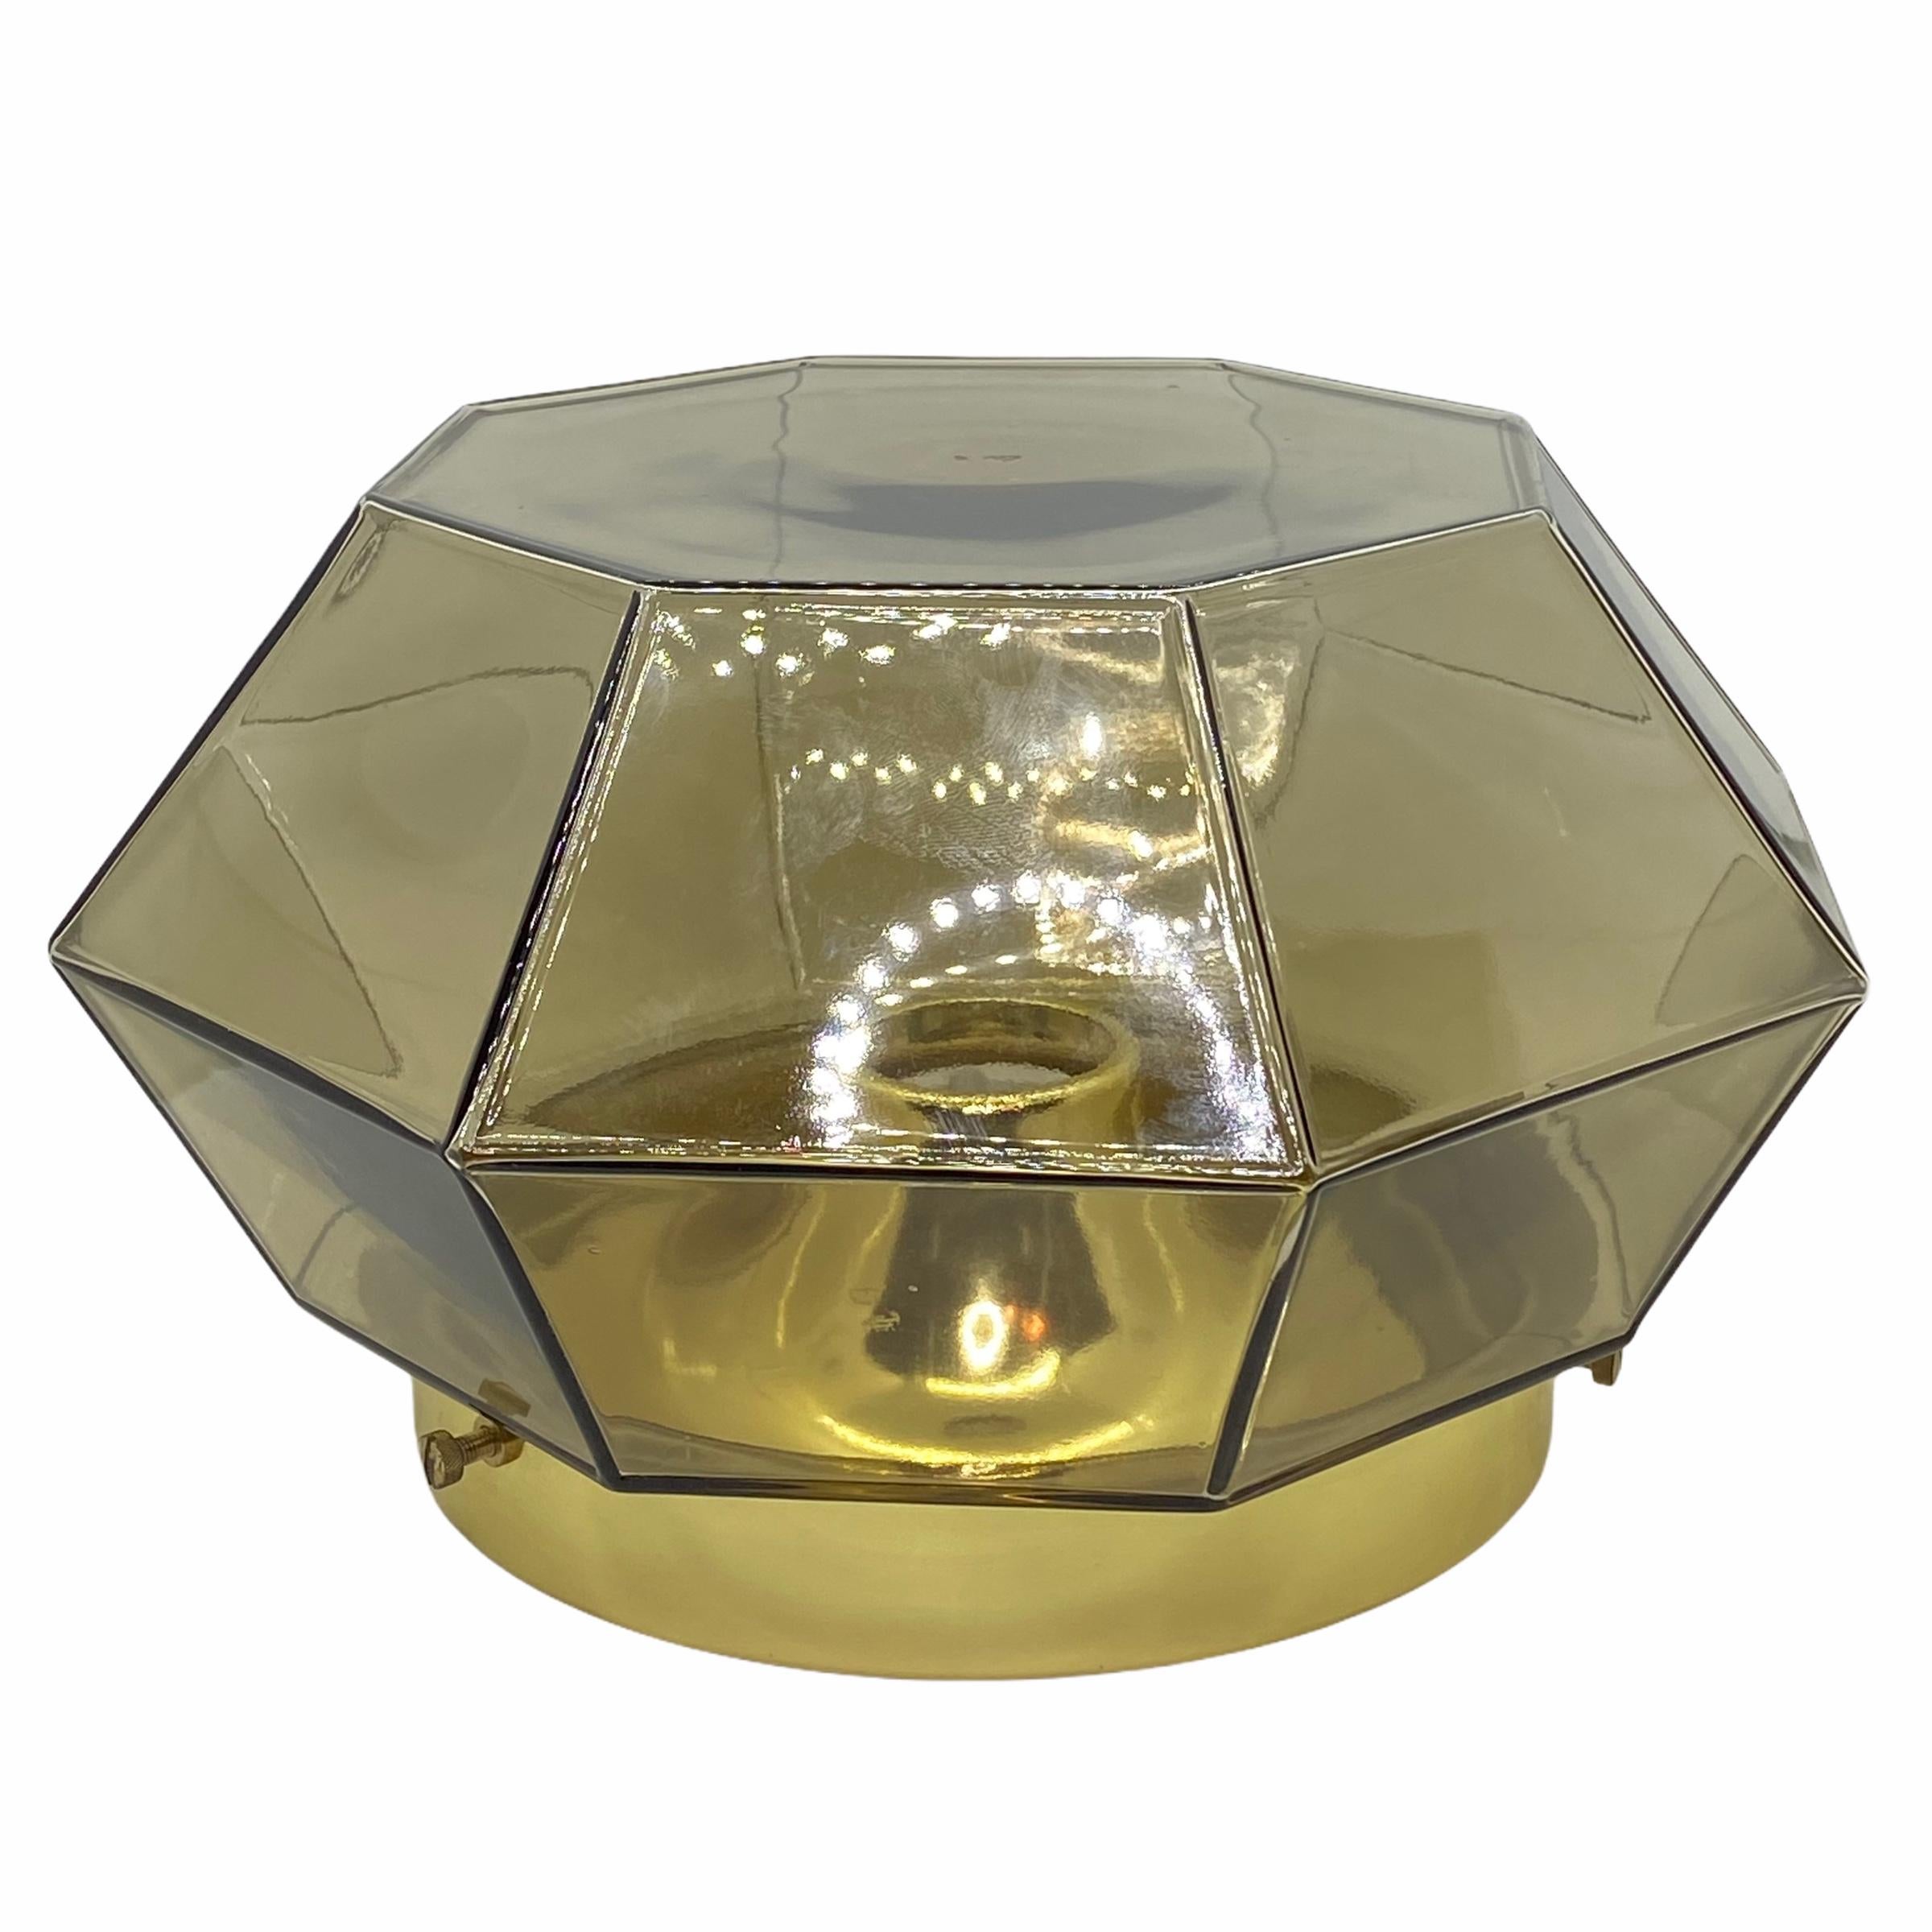 Mid-20th Century Limburg Geometric Smoked Glass and Brass Flush mount or Wall Light For Sale